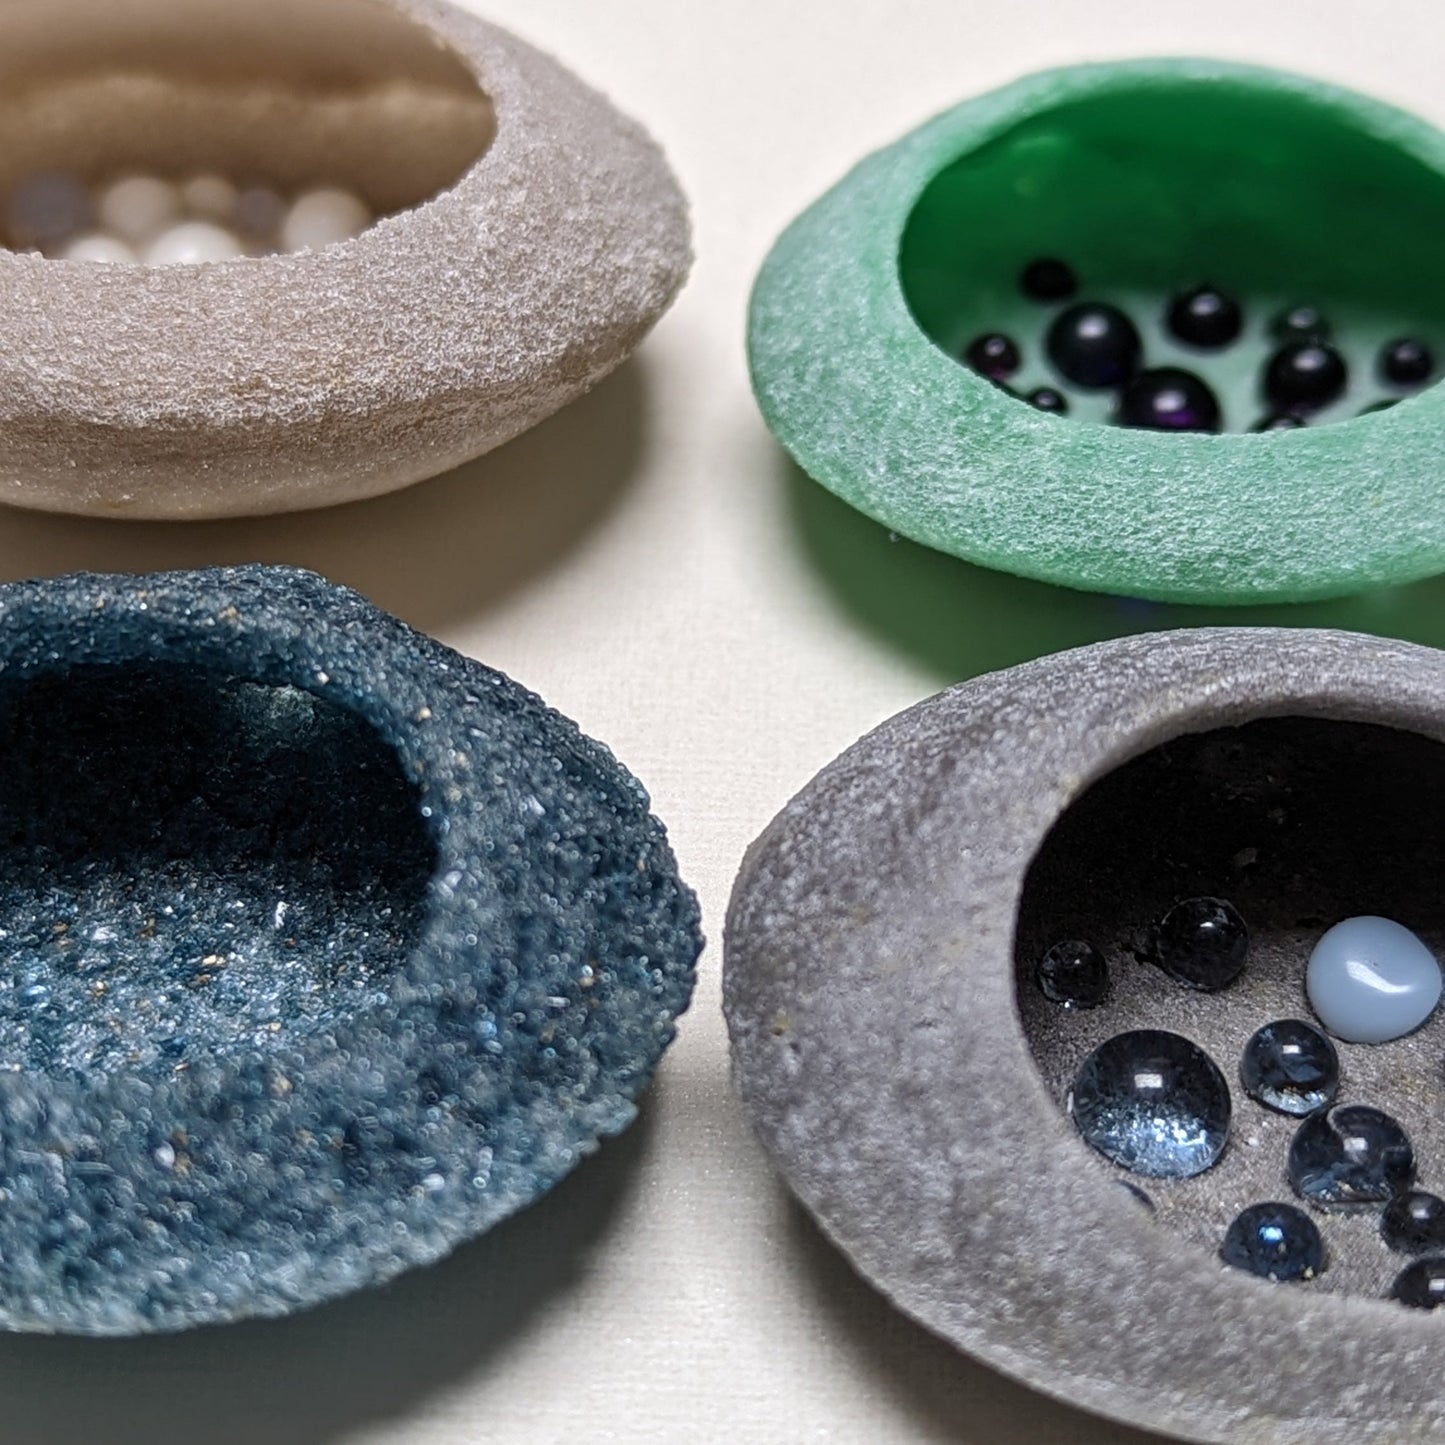 10/21 Intro to Glass Clay for Jewelry